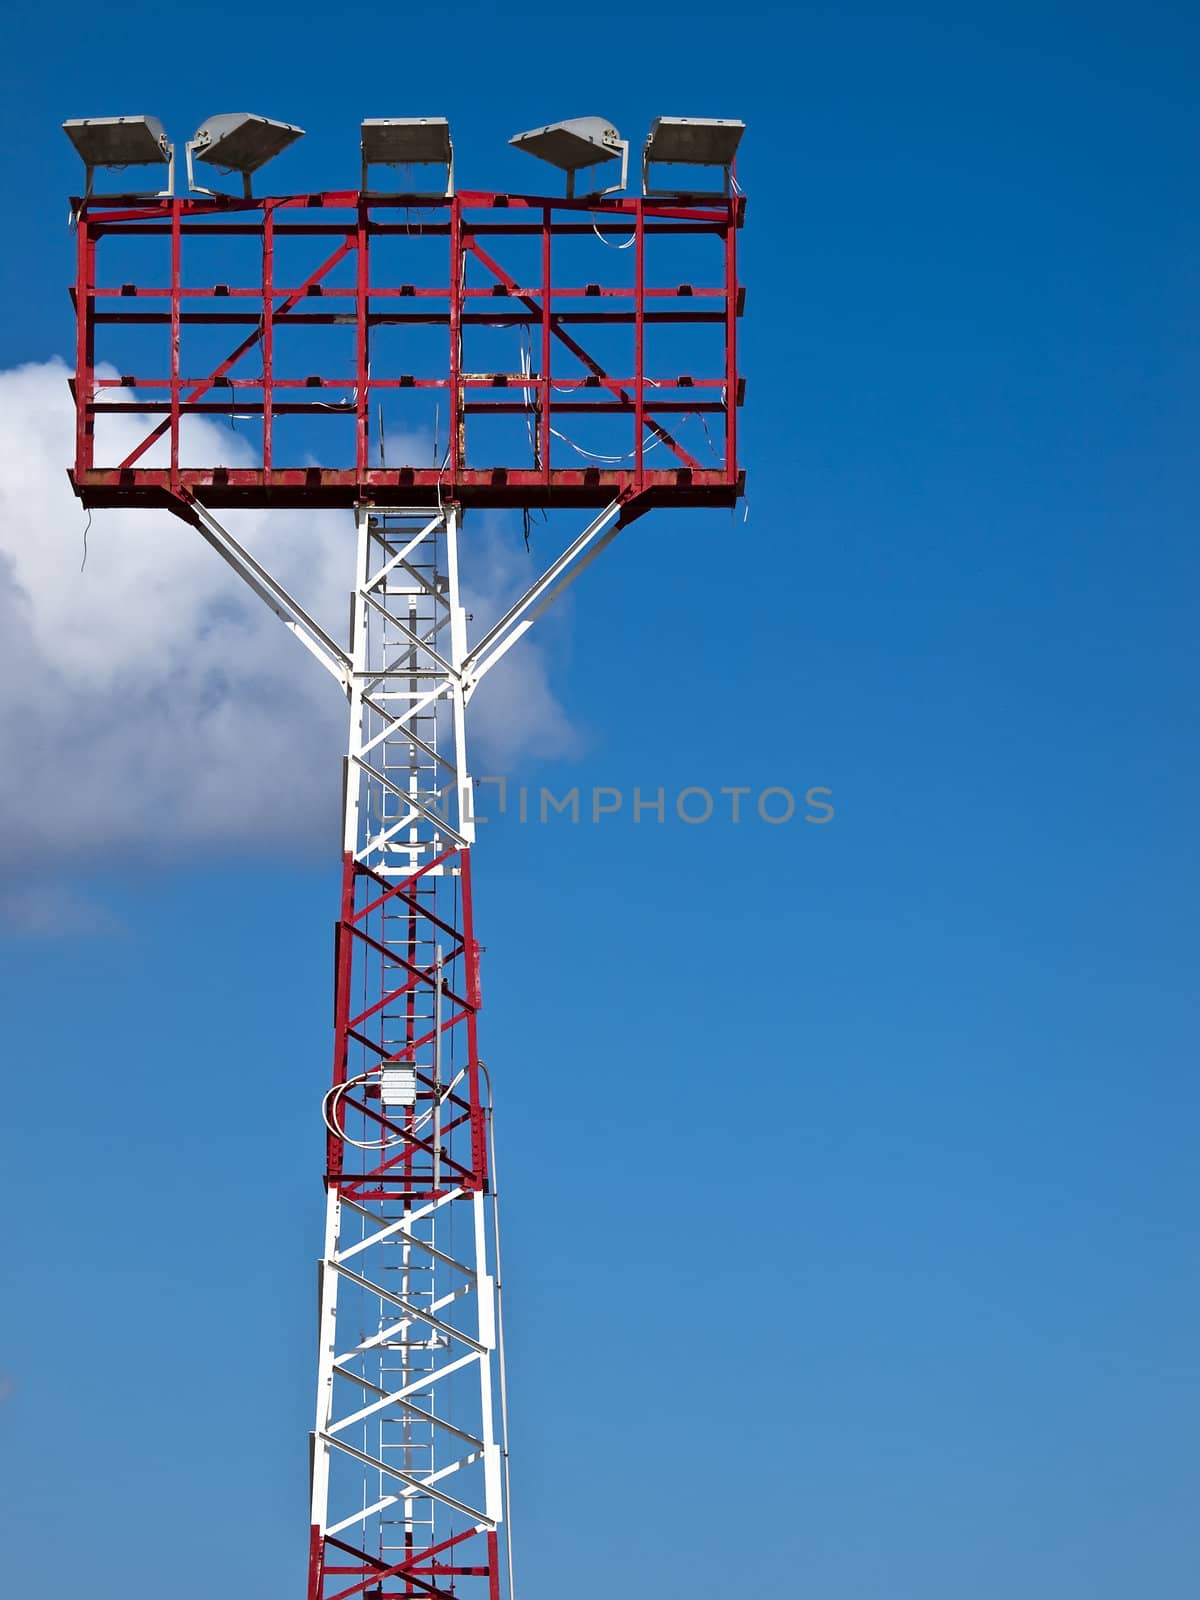 Airfield lighting tower against a clear blue sky